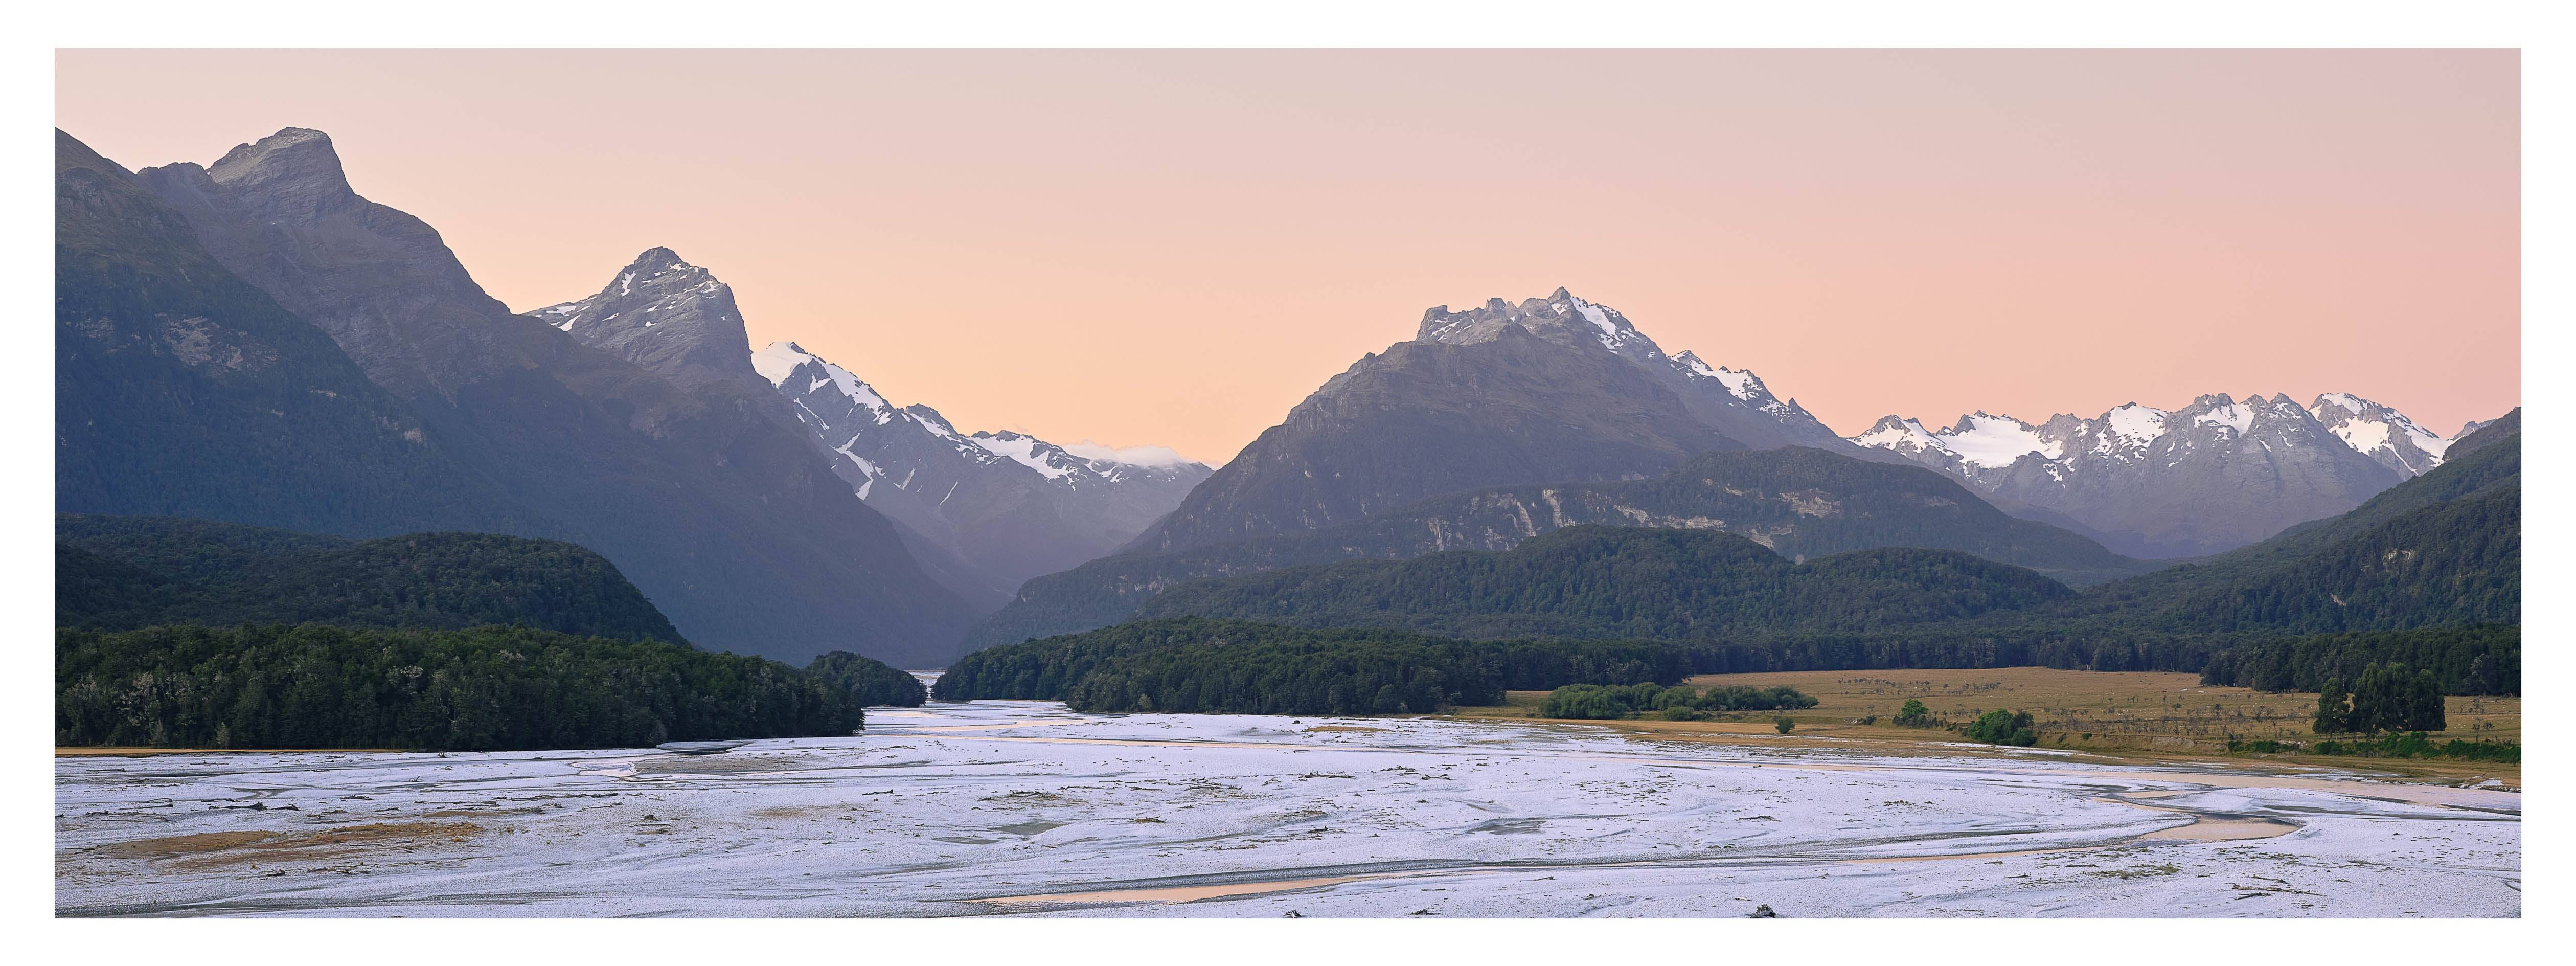 Medium Format Landscape Photography in New Zealand's South Island - Day 6 - Stephen Milner